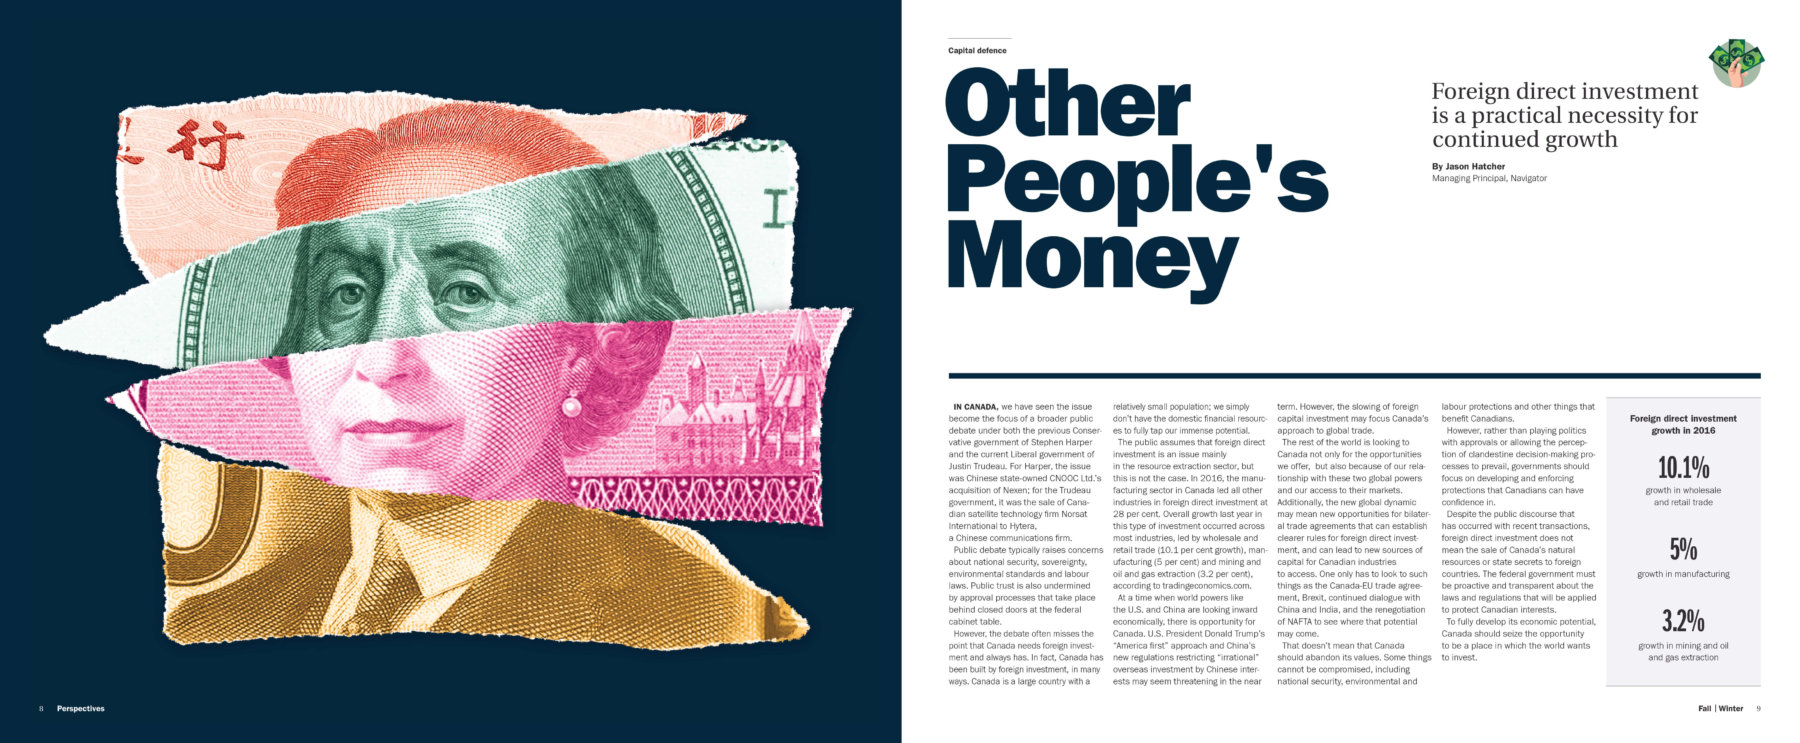 Navigator Perspectives - Other People's Money